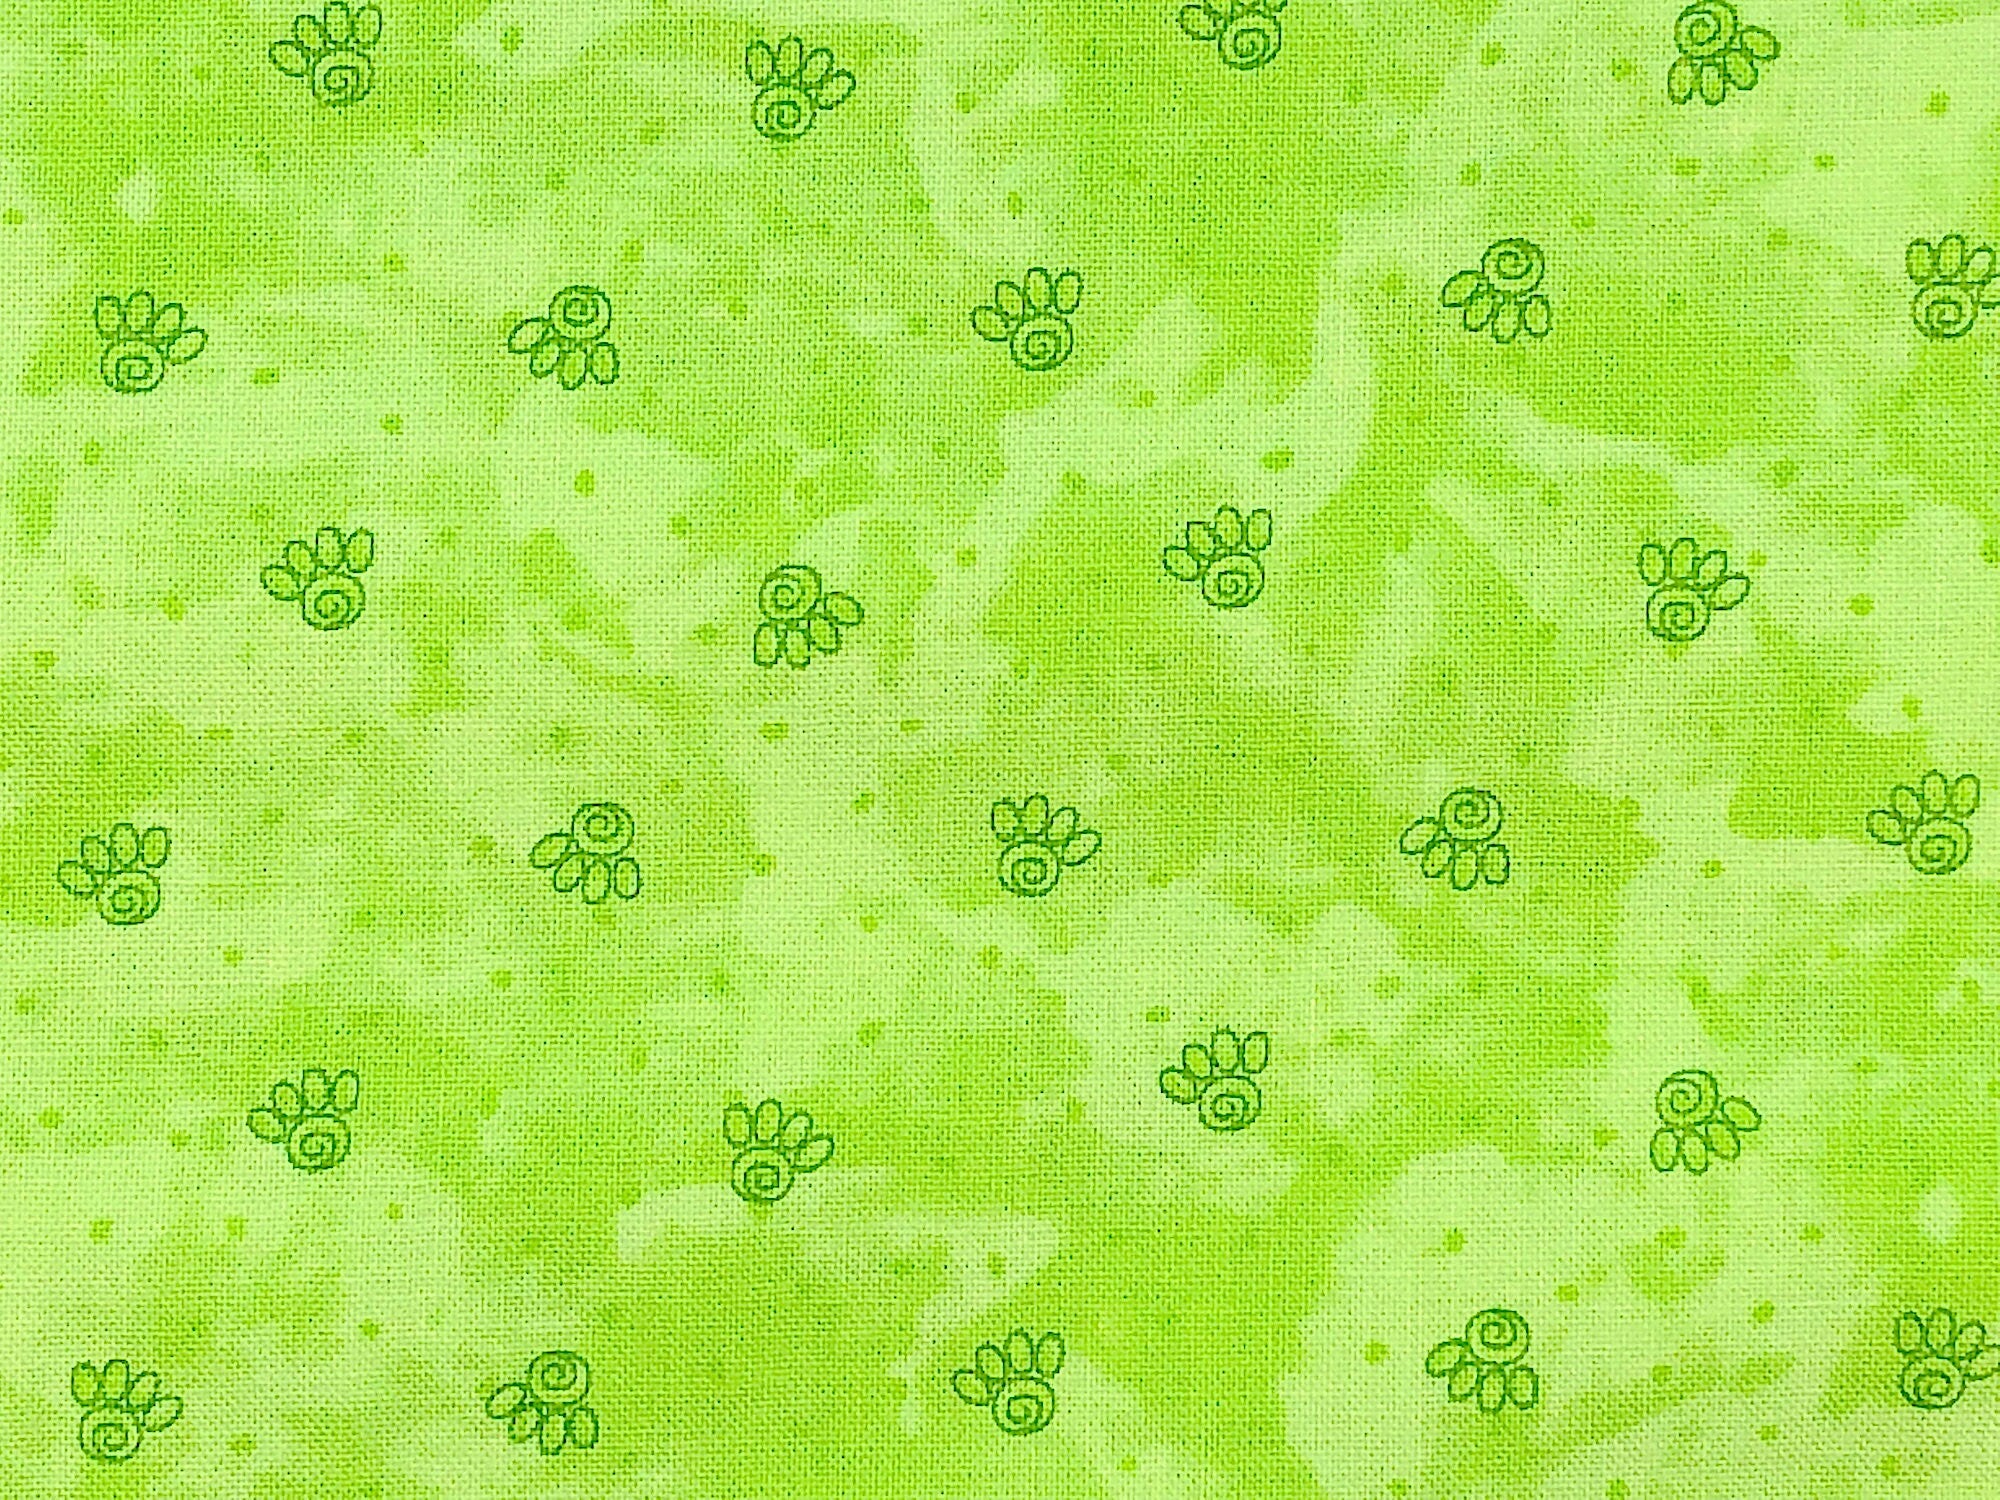 This fabric is called Happy Catz and is covered with green paw prints.